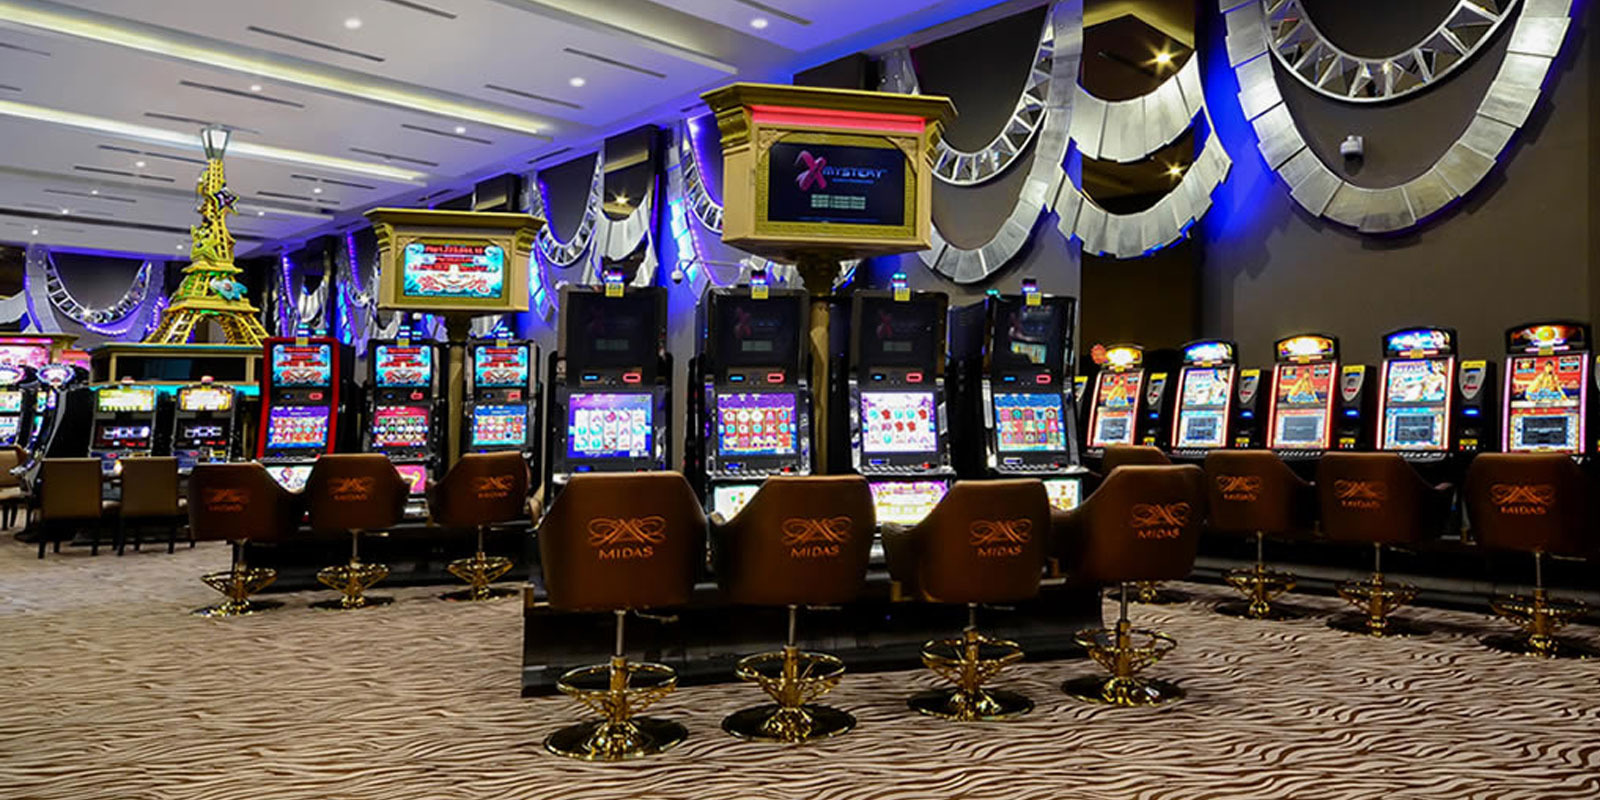 Where can I find a bunch of casino slots online? - Quora